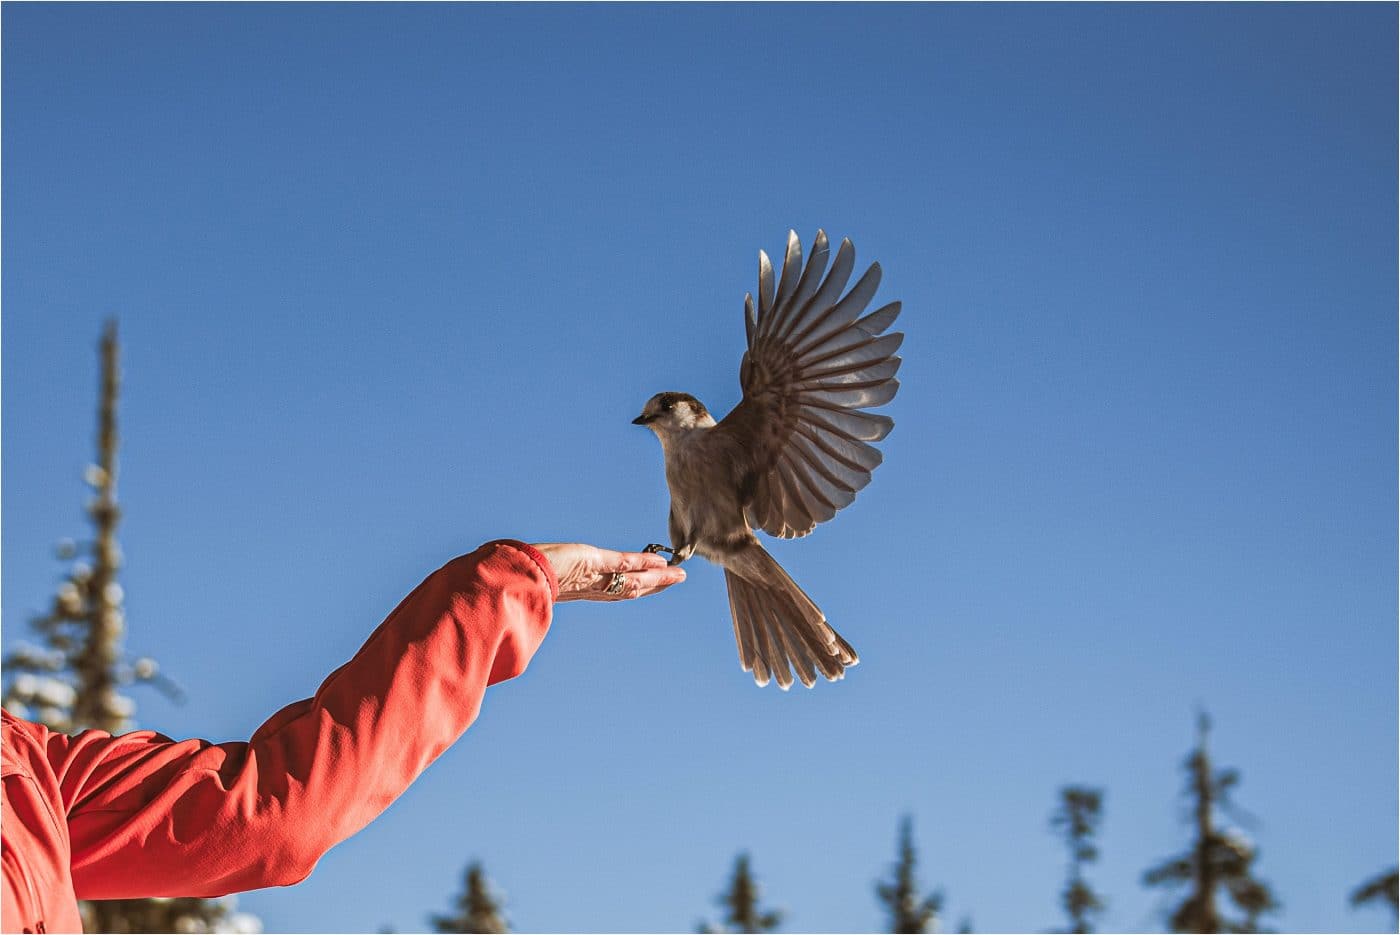 A Gray Jay lands on a girls hand to grab a treat